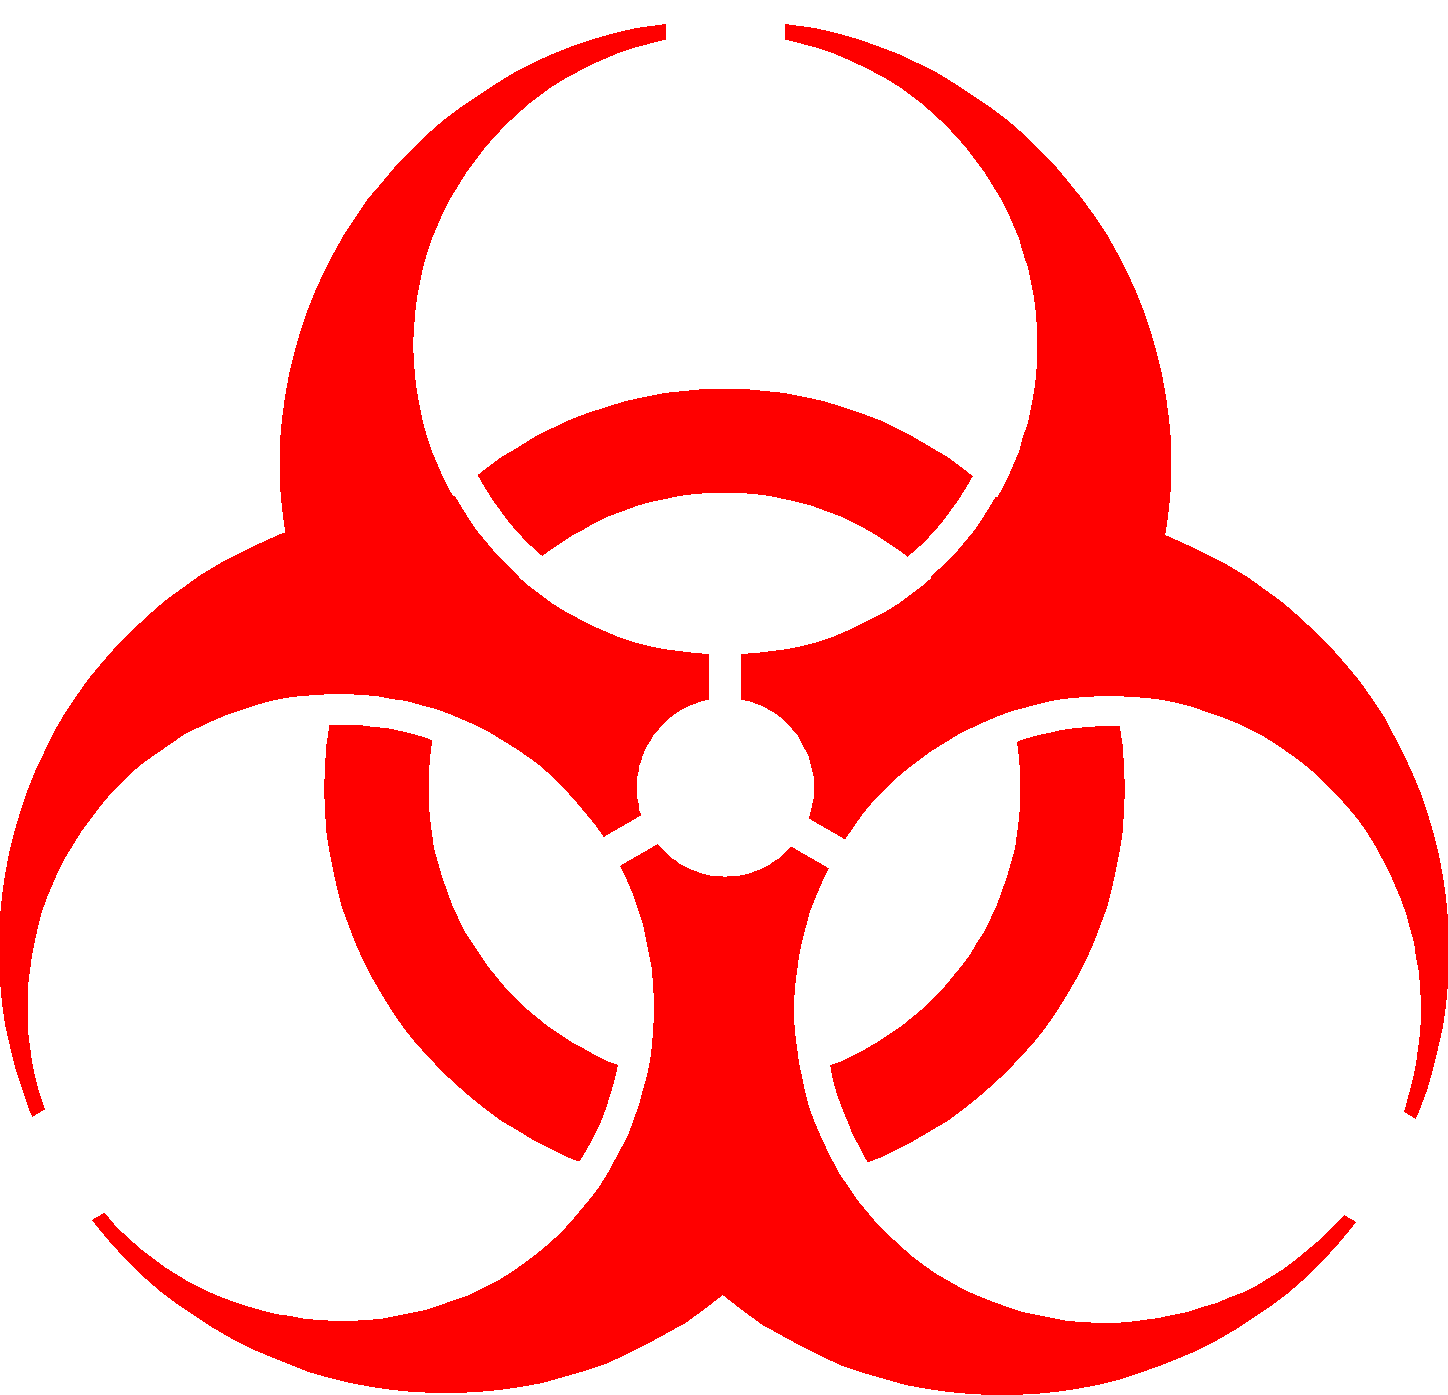 Green Radioactive Symbol Png - ClipArt Best